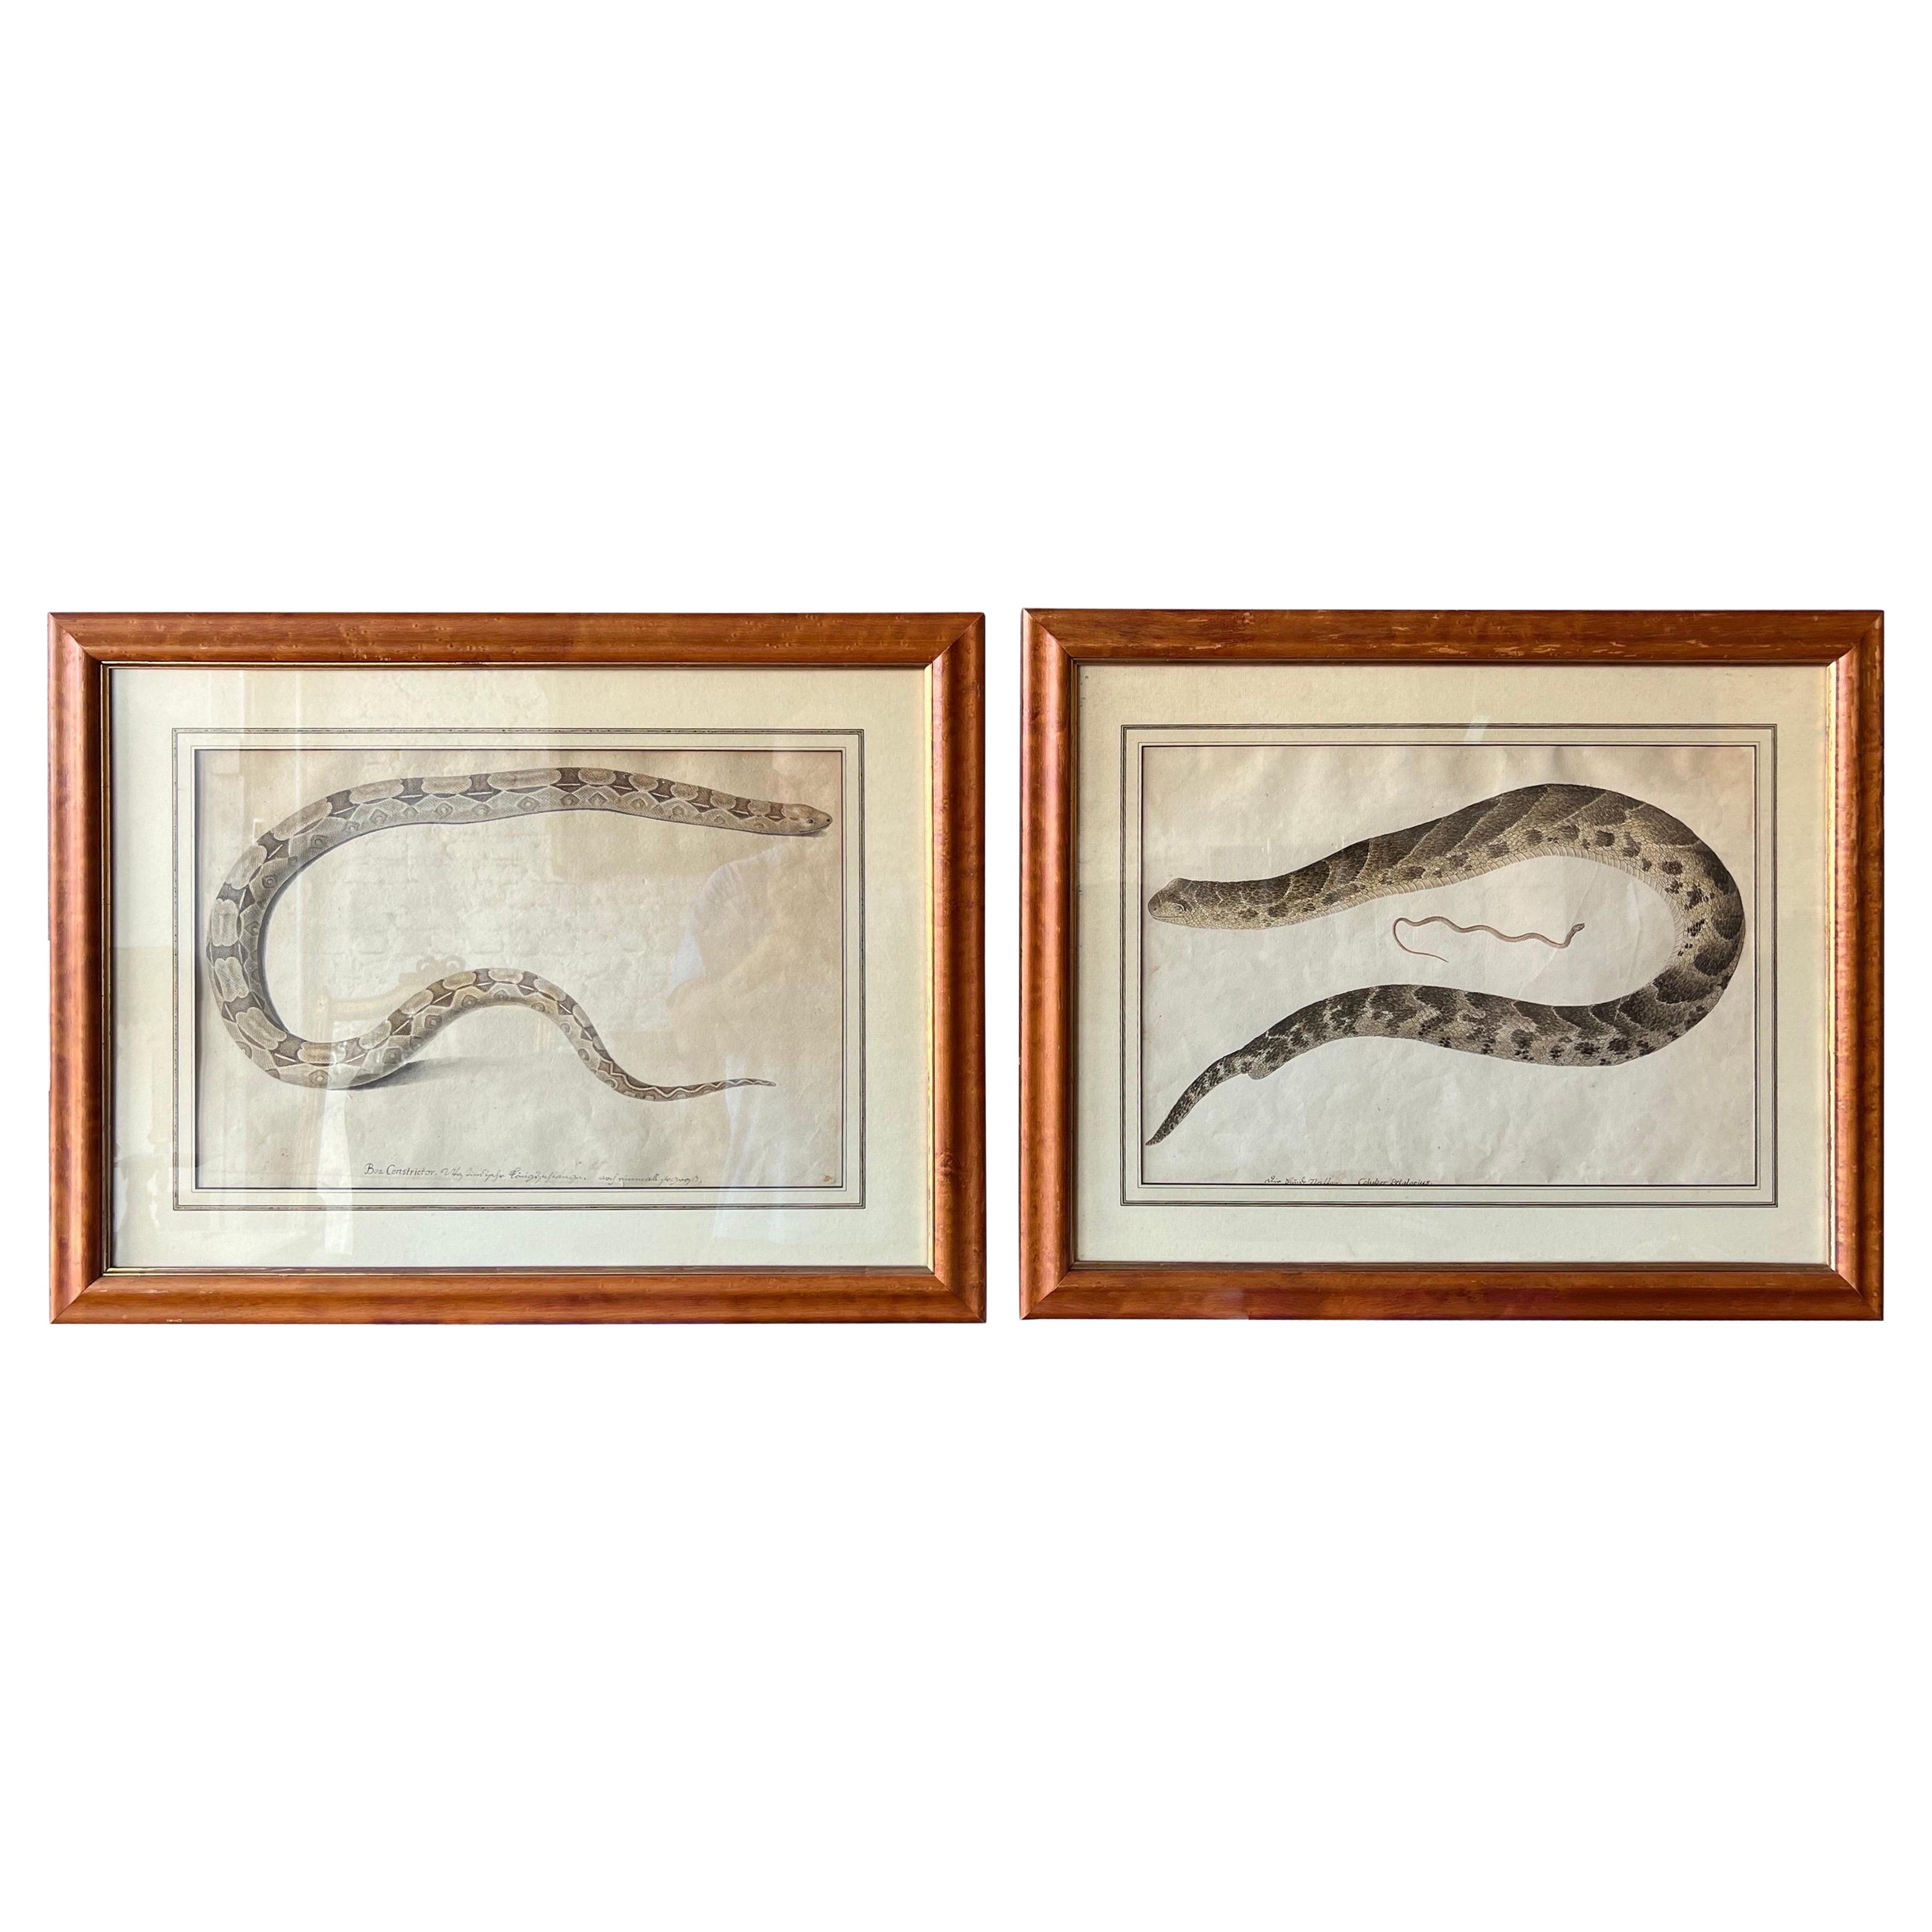 Pair of 18th- Early 19th Century Engravings of Snakes in Maple Frames